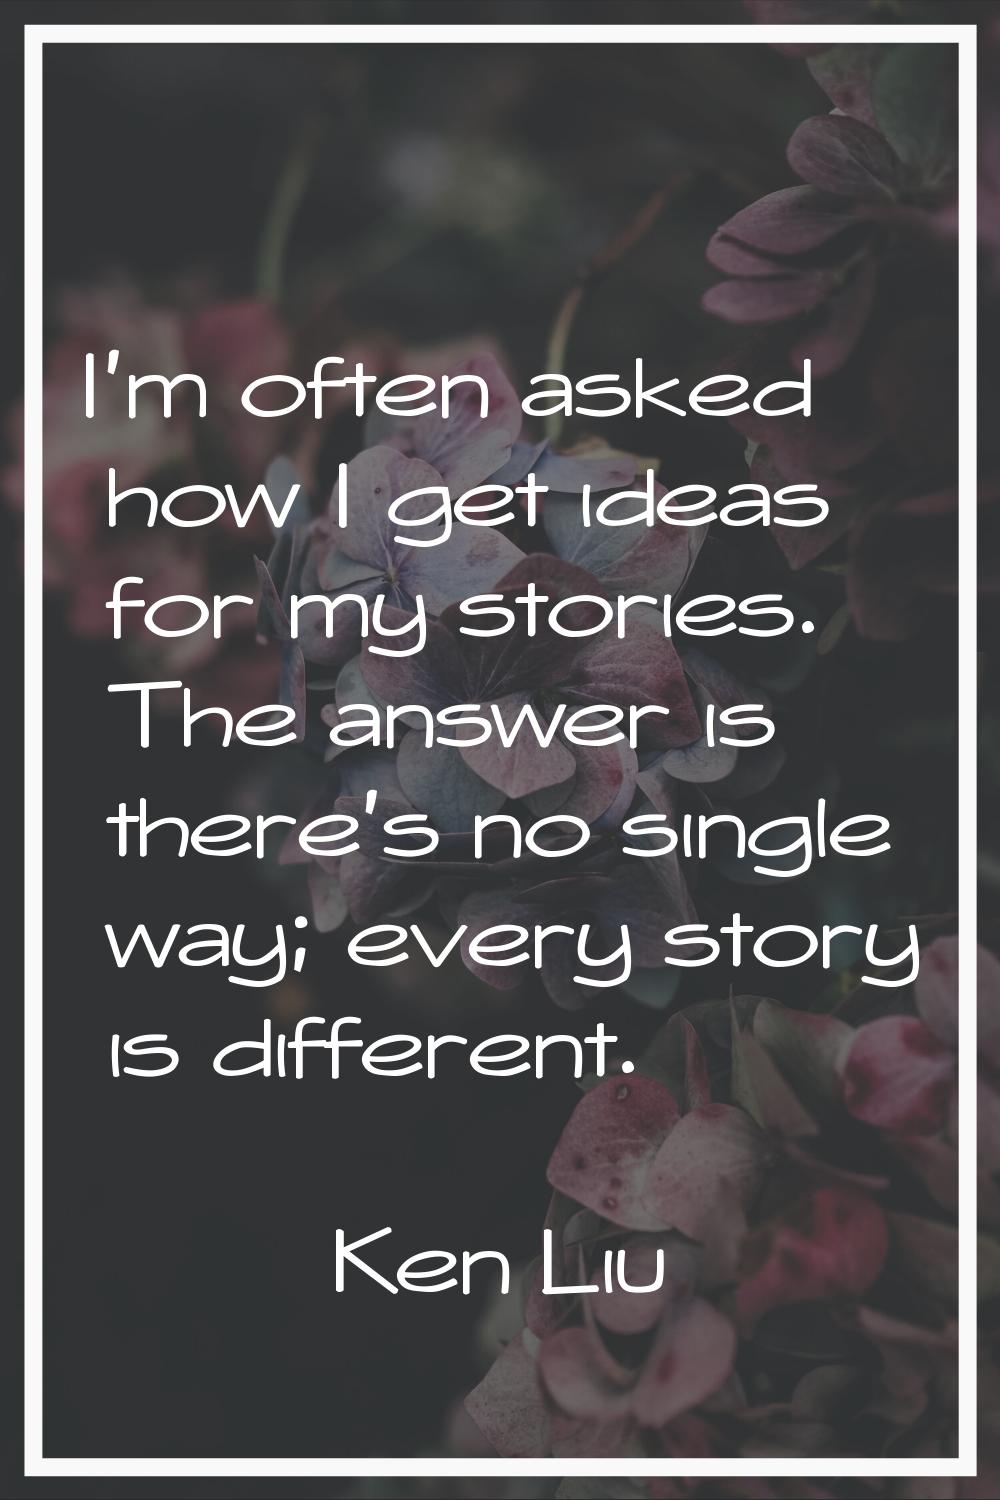 I'm often asked how I get ideas for my stories. The answer is there's no single way; every story is